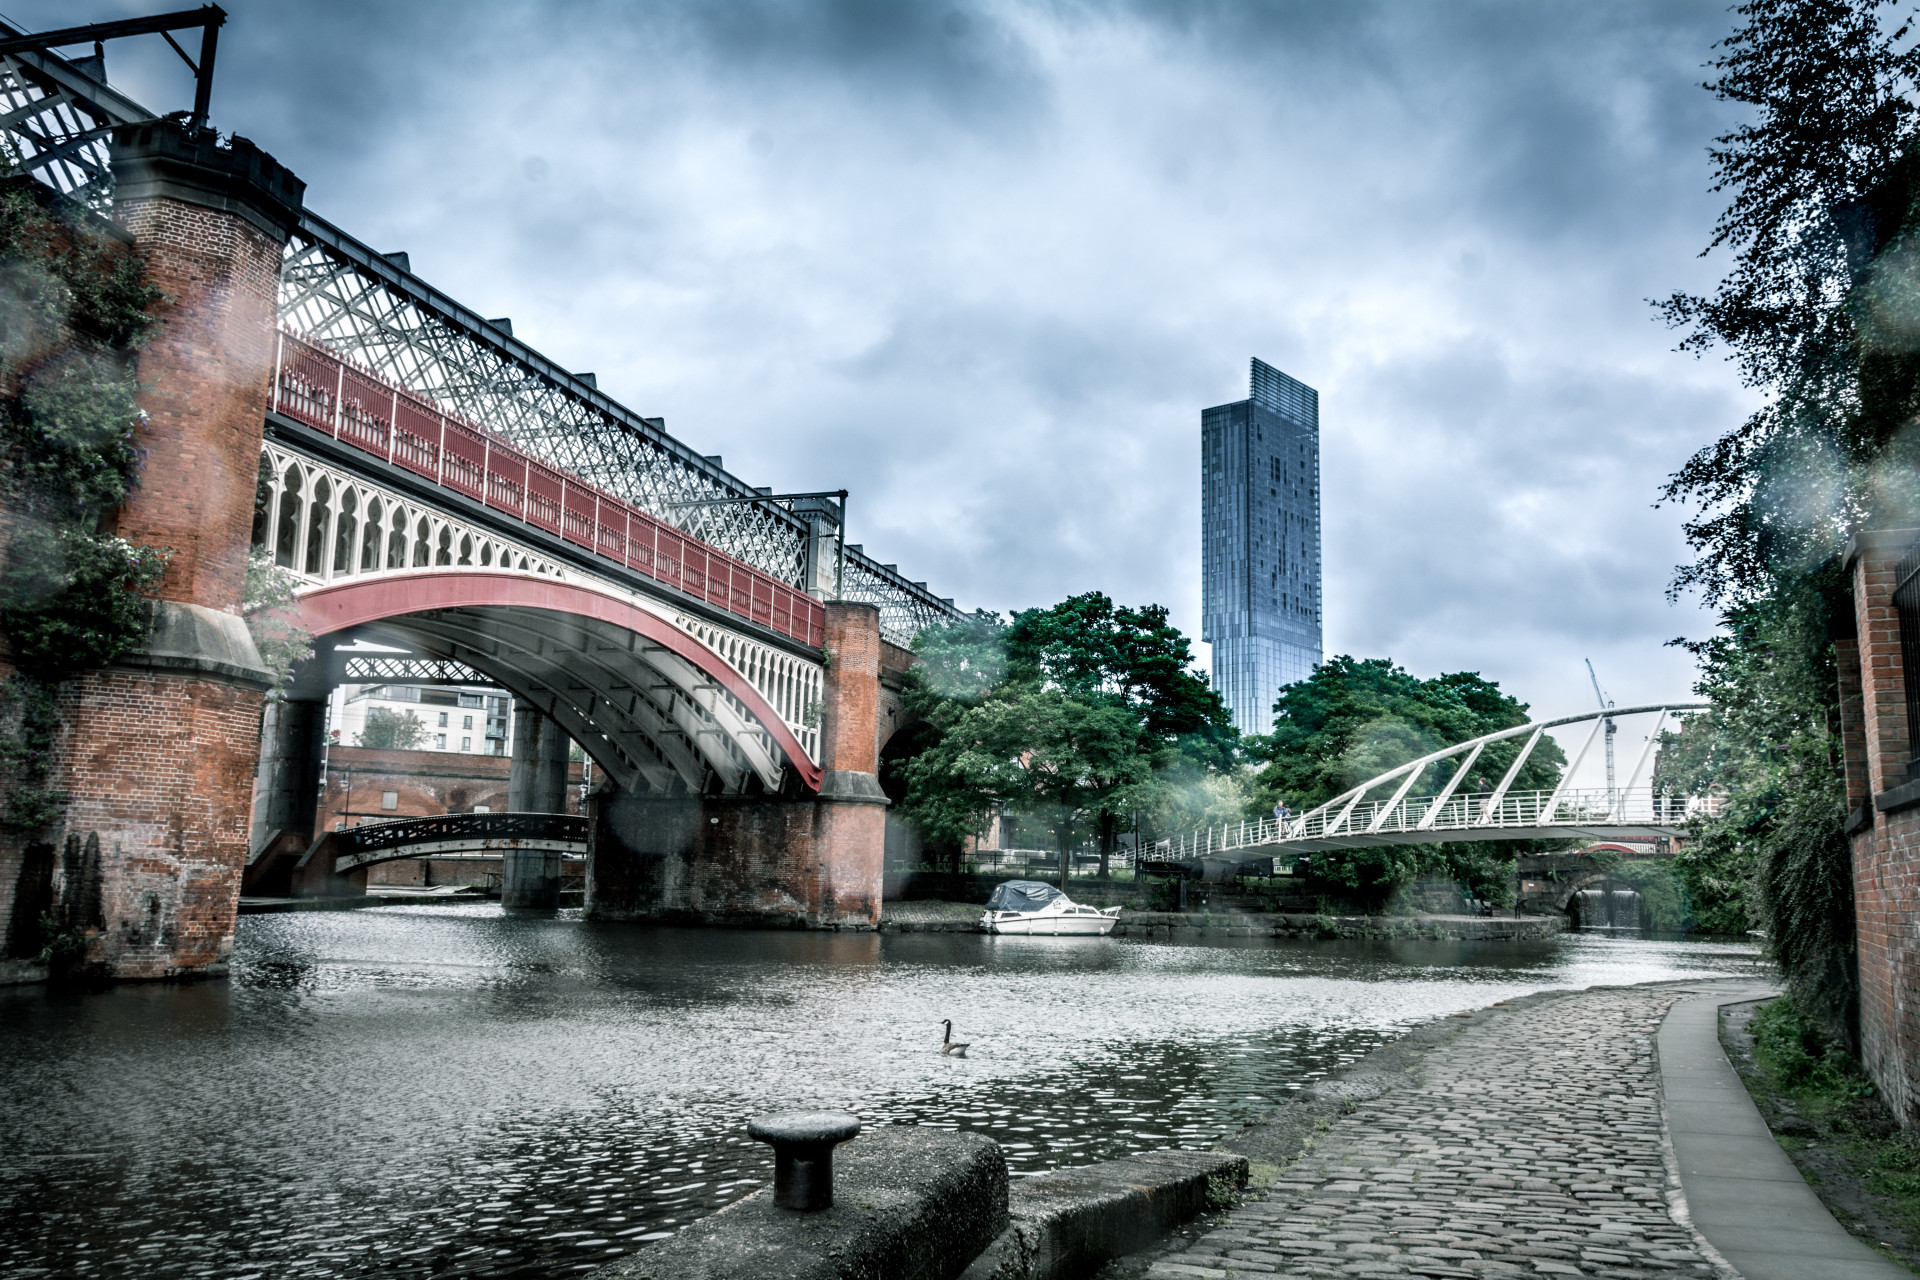 Manchester has undergone a huge renovation project, which has made the city flatter.<p><a href="https://www.msn.com/en-us/community/channel/vid-7xx8mnucu55yw63we9va2gwr7uihbxwc68fxqp25x6tg4ftibpra?cvid=94631541bc0f4f89bfd59158d696ad7e">Follow us and access great exclusive content every day</a></p>